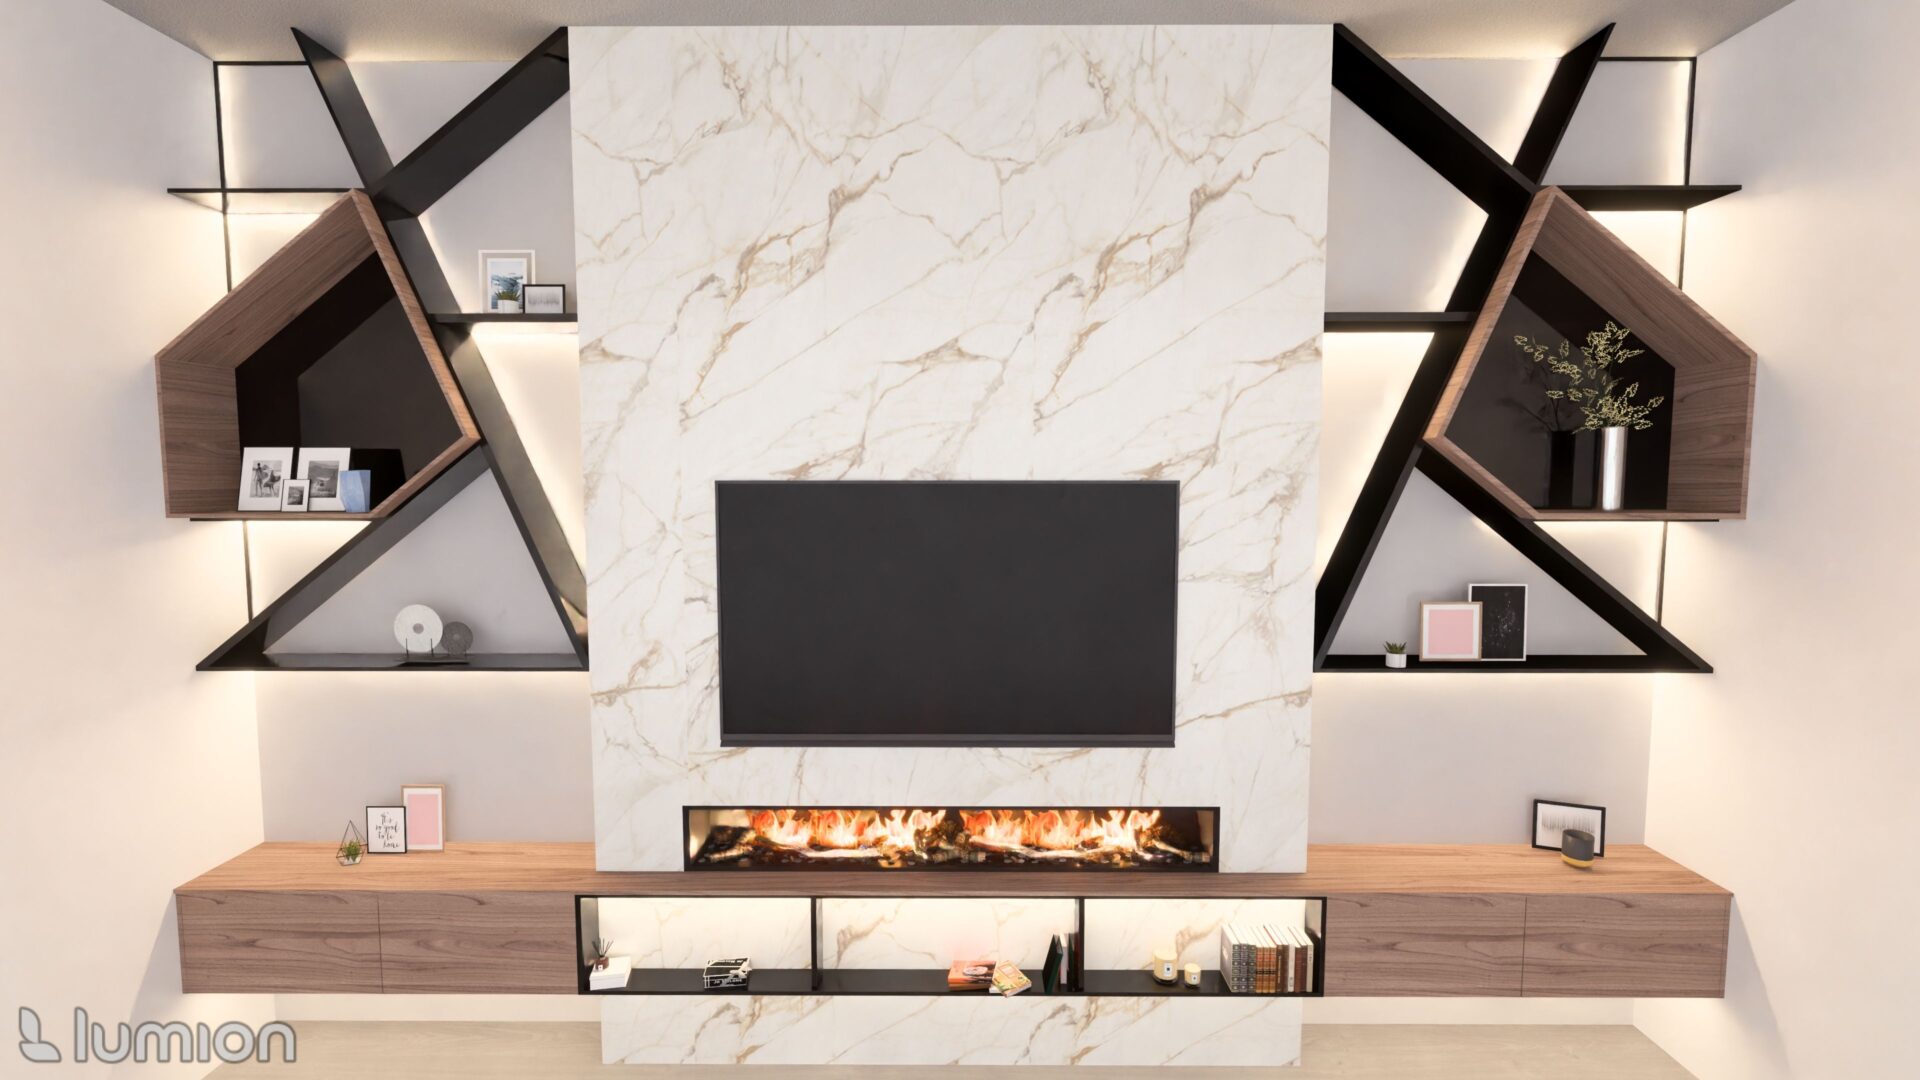 A fireplace with a television mounted above it.